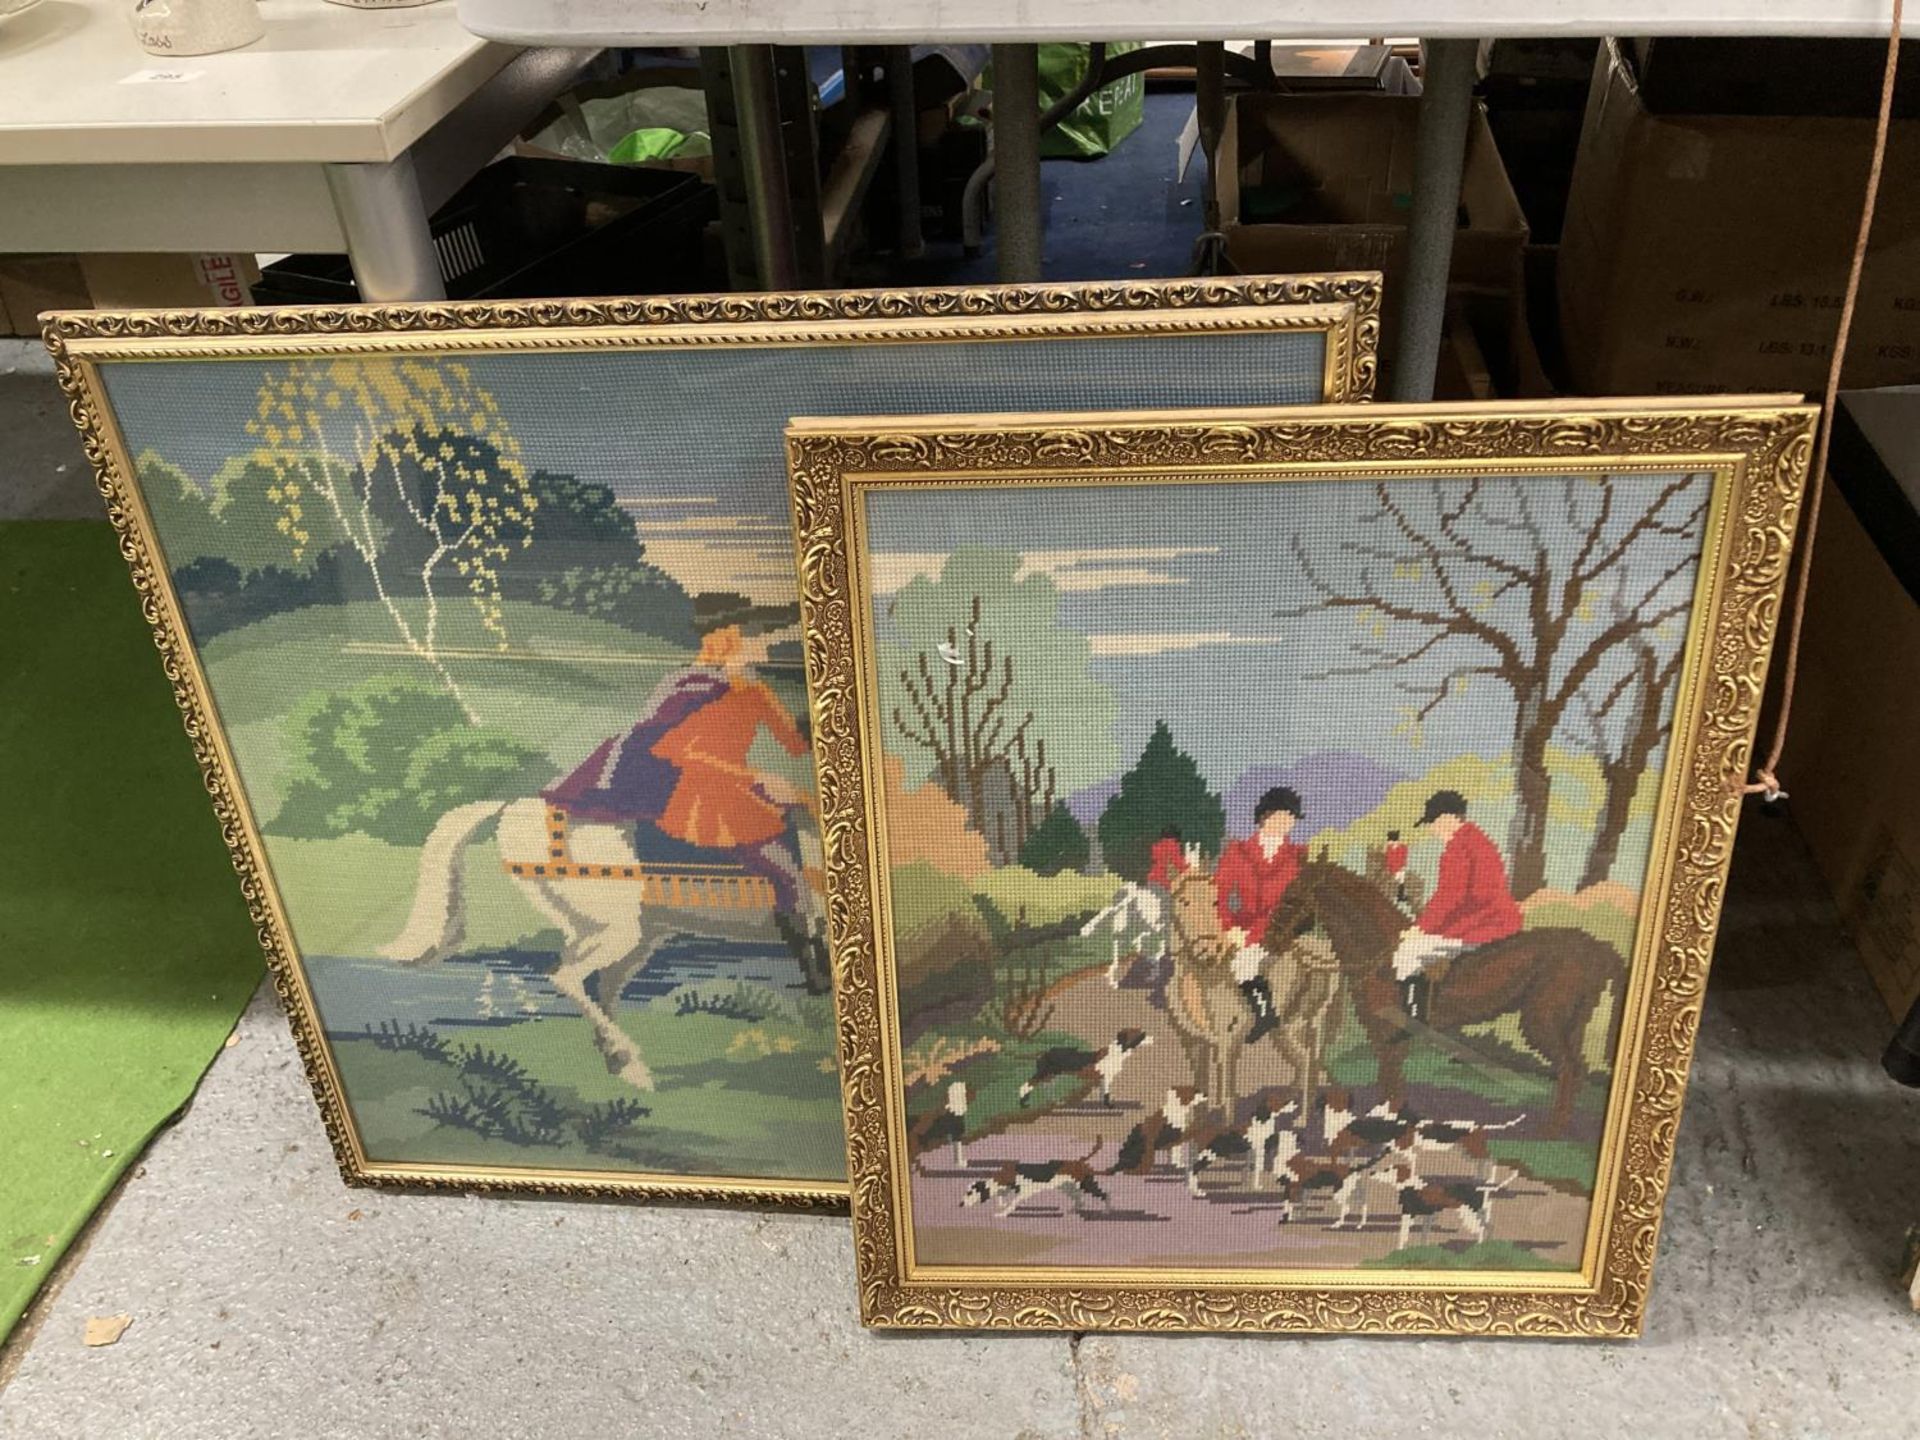 TWO GILT FRAMED WOOLWORK TAPESTRIES, ONE A HUNT SCENE 46CM X 55.5CM, THE OTHER A KNIGHT ON A HORSE